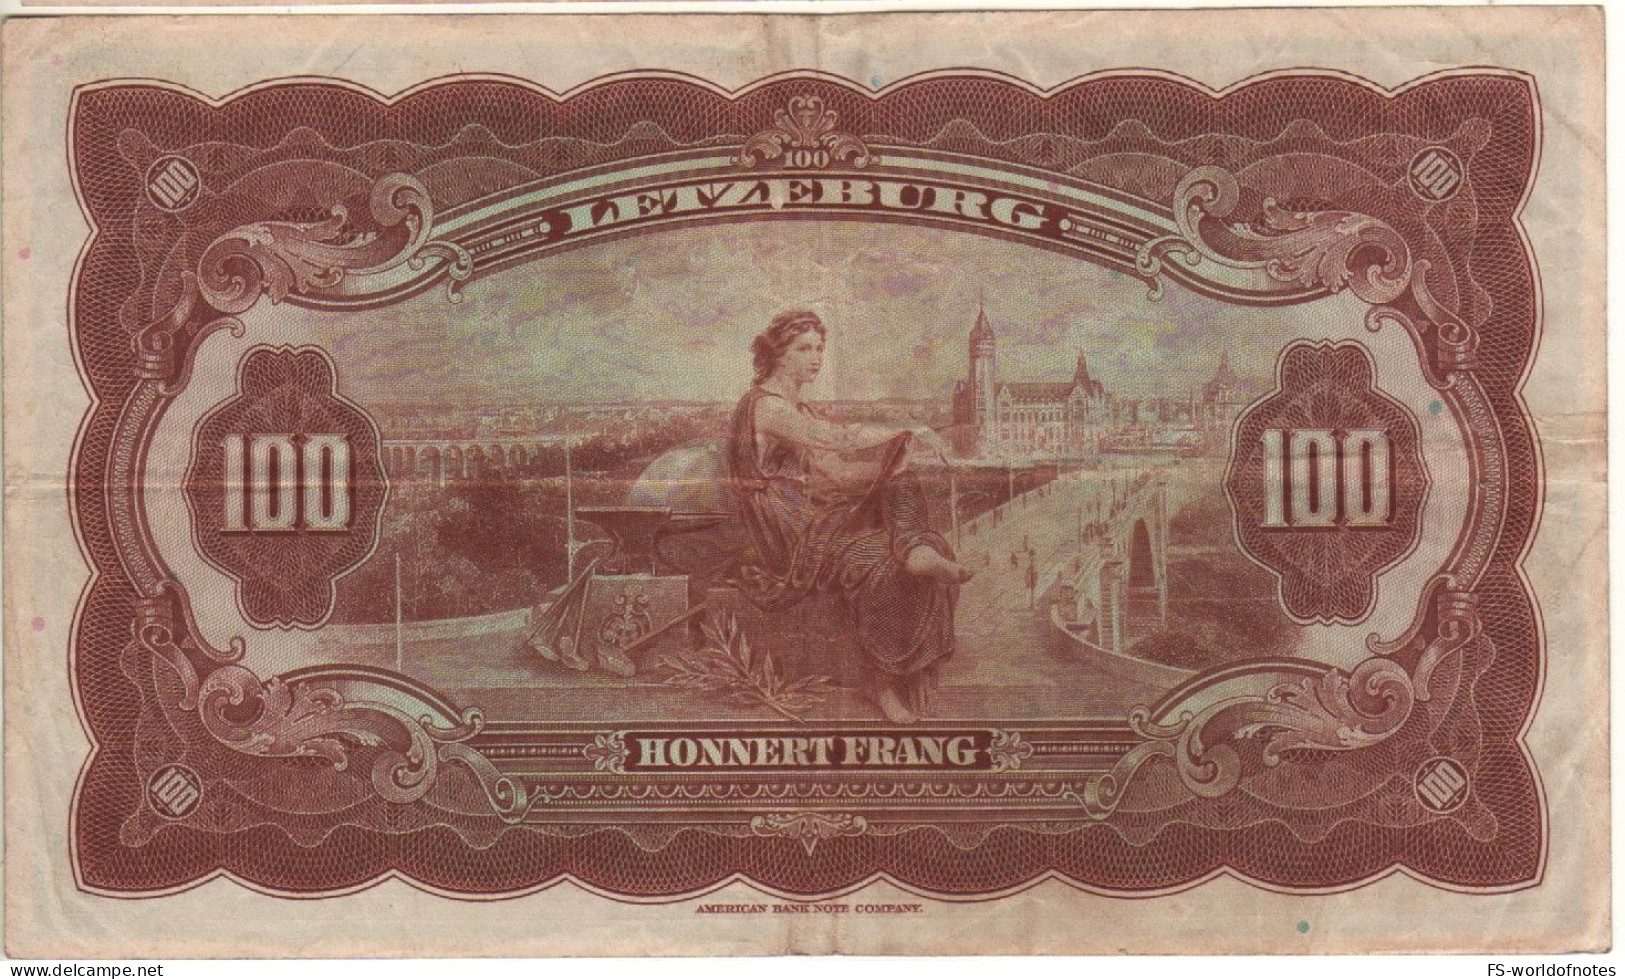 LUXEMBOURG 100 Francs   P47a  1944  (Grand Duchess Charlotte +  Allegorical Woman, Adolphe Bridge, Luxembourg  On Back) - Luxembourg